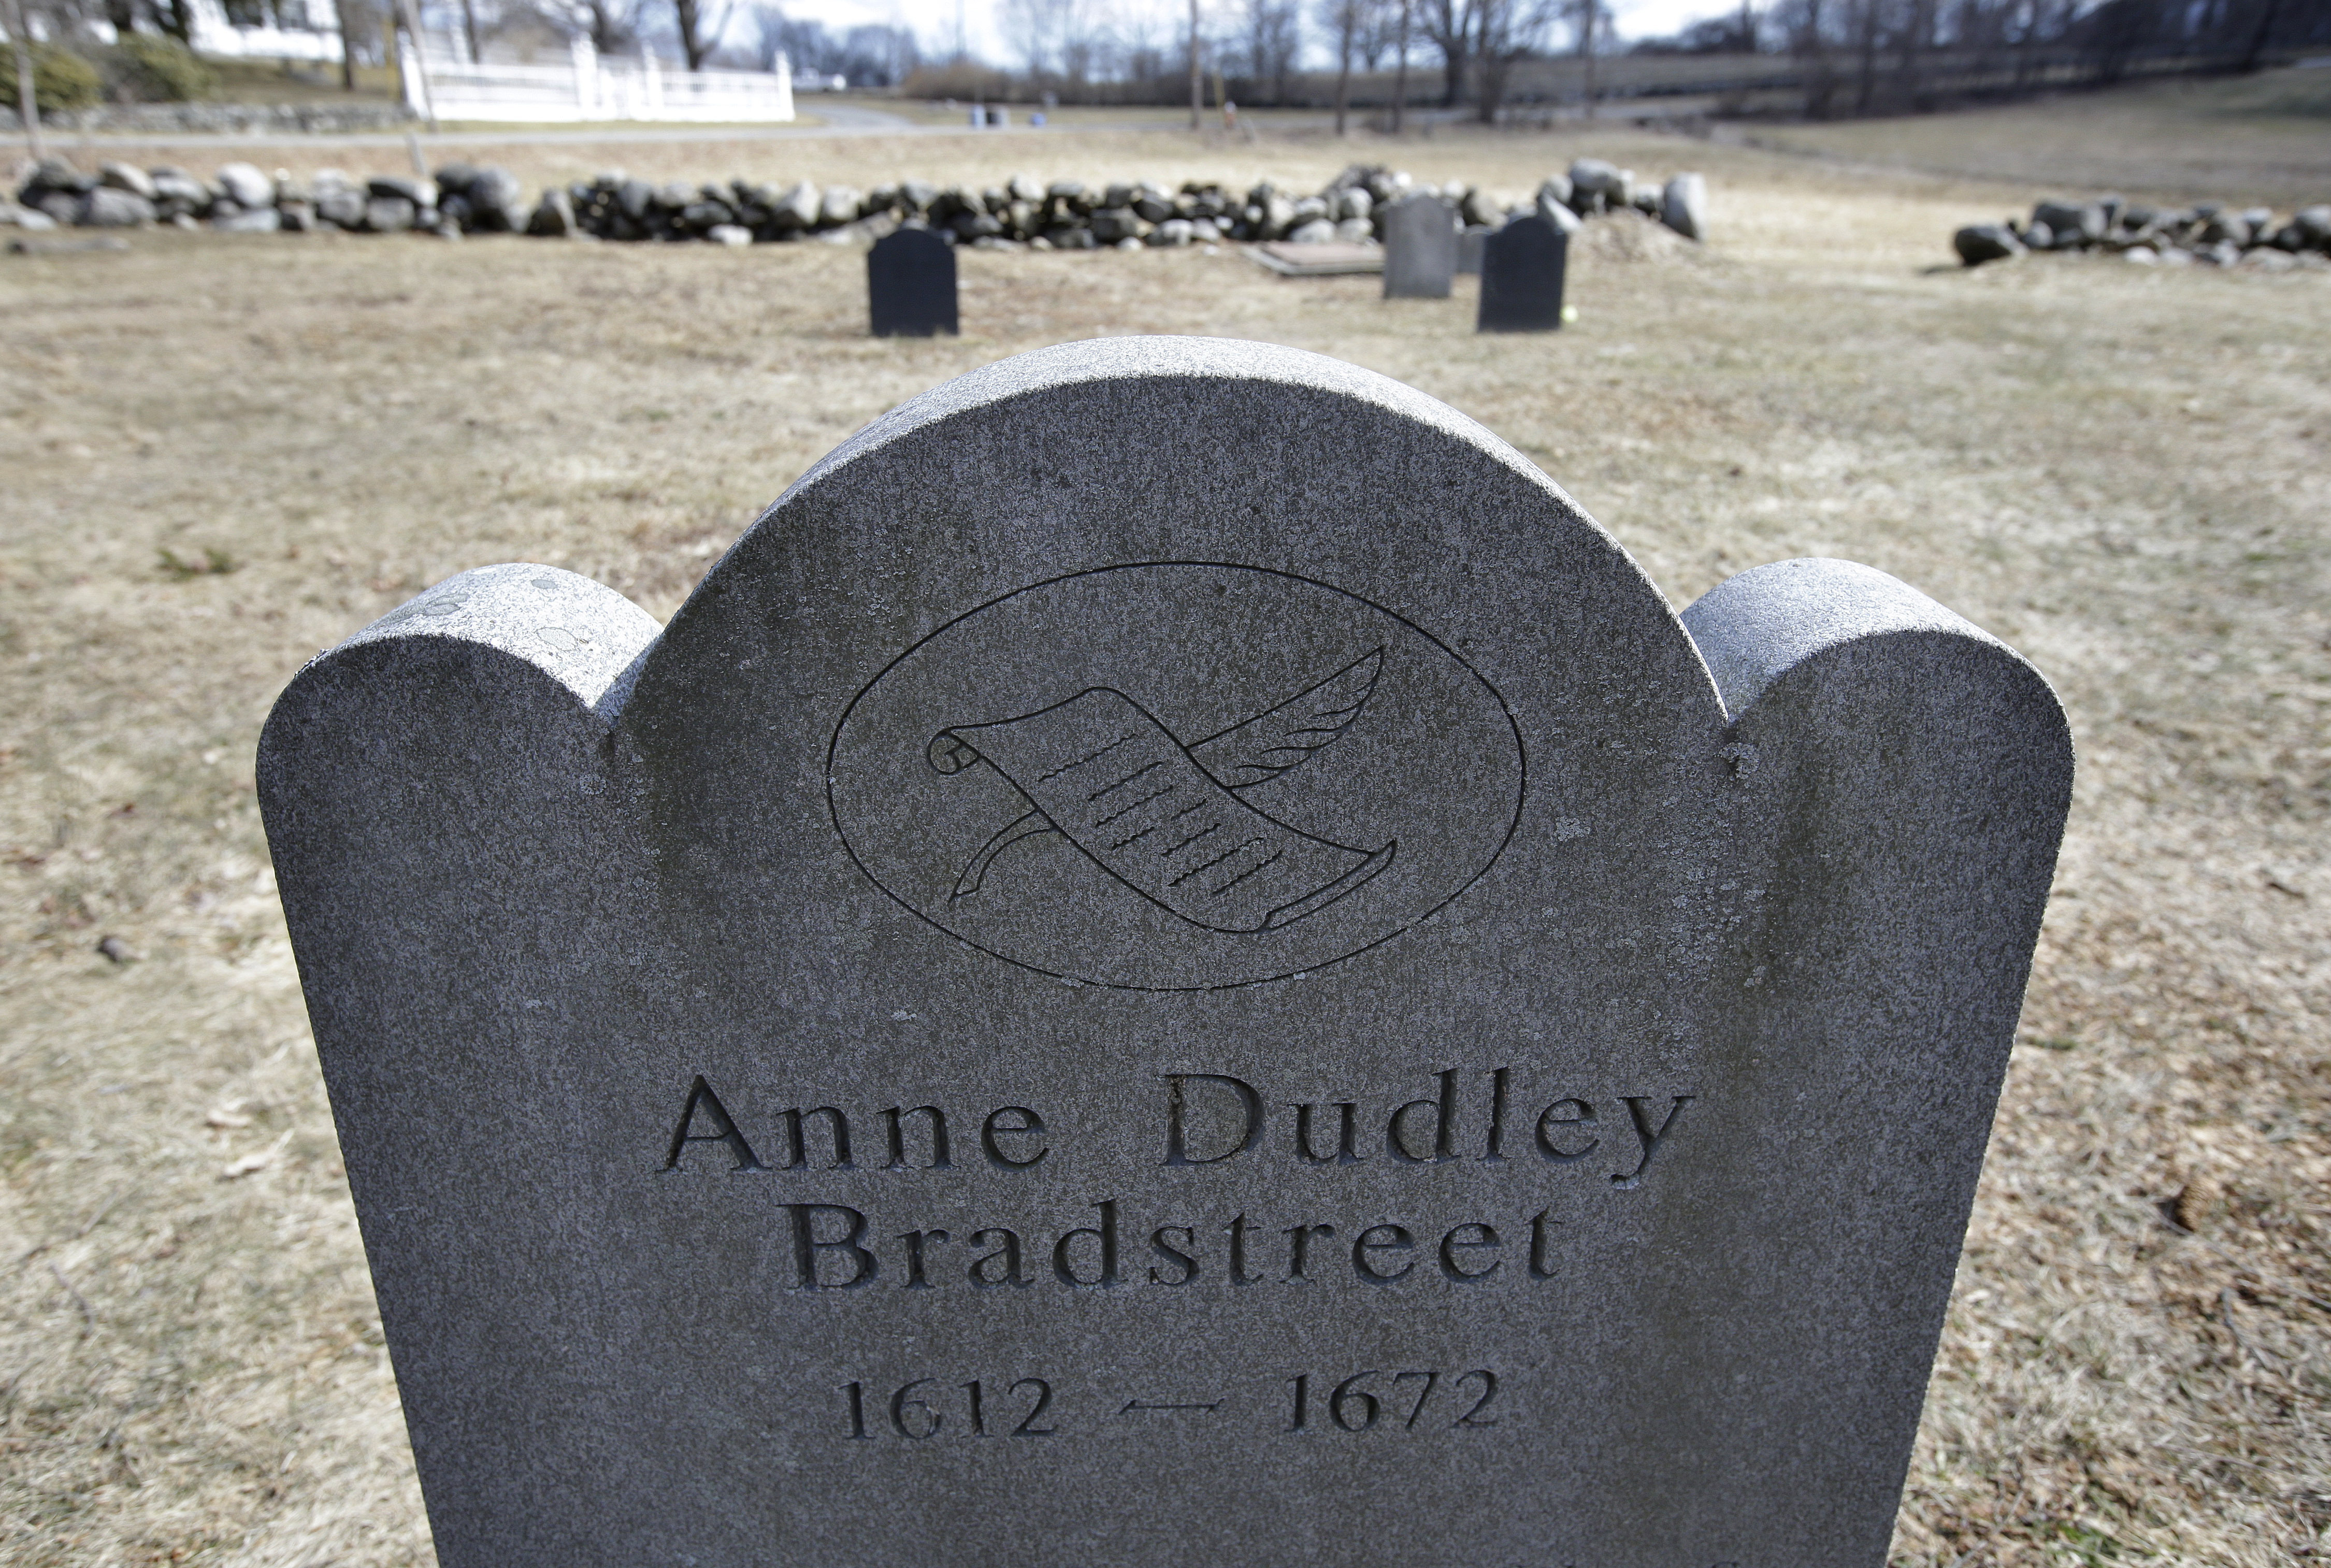 Search on for burial site of America's first published poet